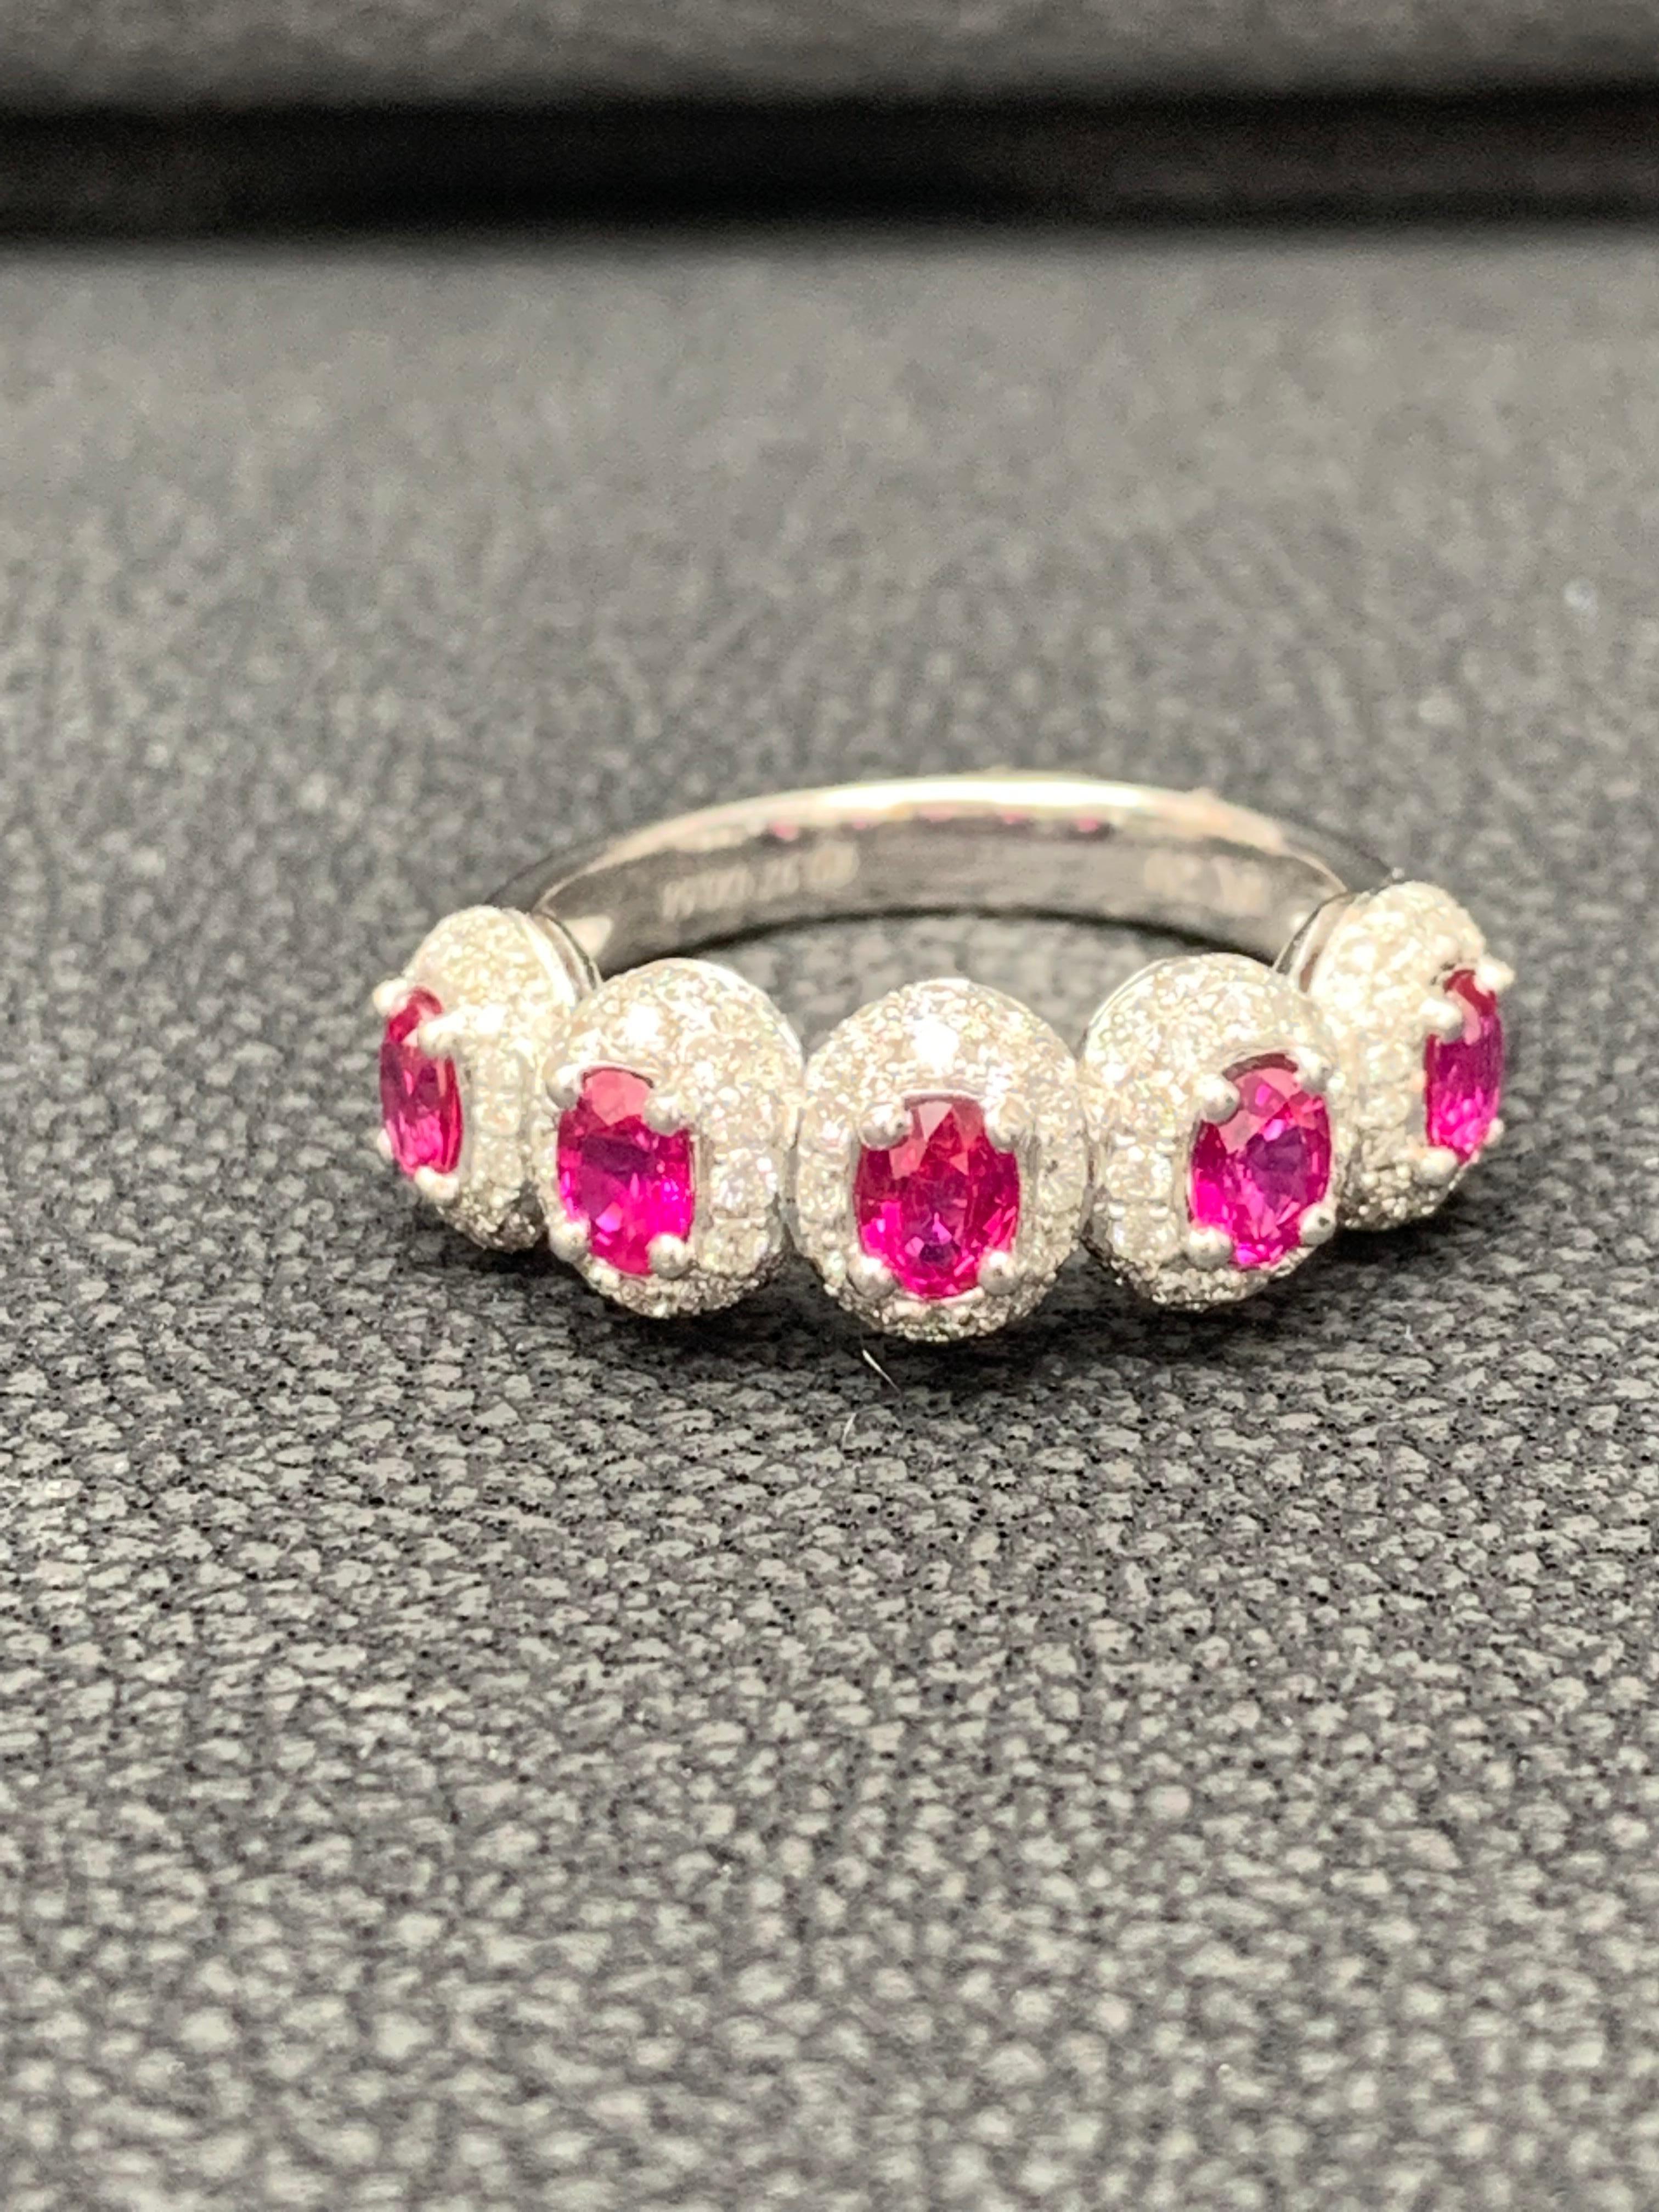 Beautiful ring set with 5 oval cut rubies weighing 1.15 carats total. Each ruby is surrounded by a single row of round cut melee diamonds weighing 0.66 carats total. Set in 18k white gold. 

Size 6.5 US (Sizable). One of a Kind  piece.
All diamonds